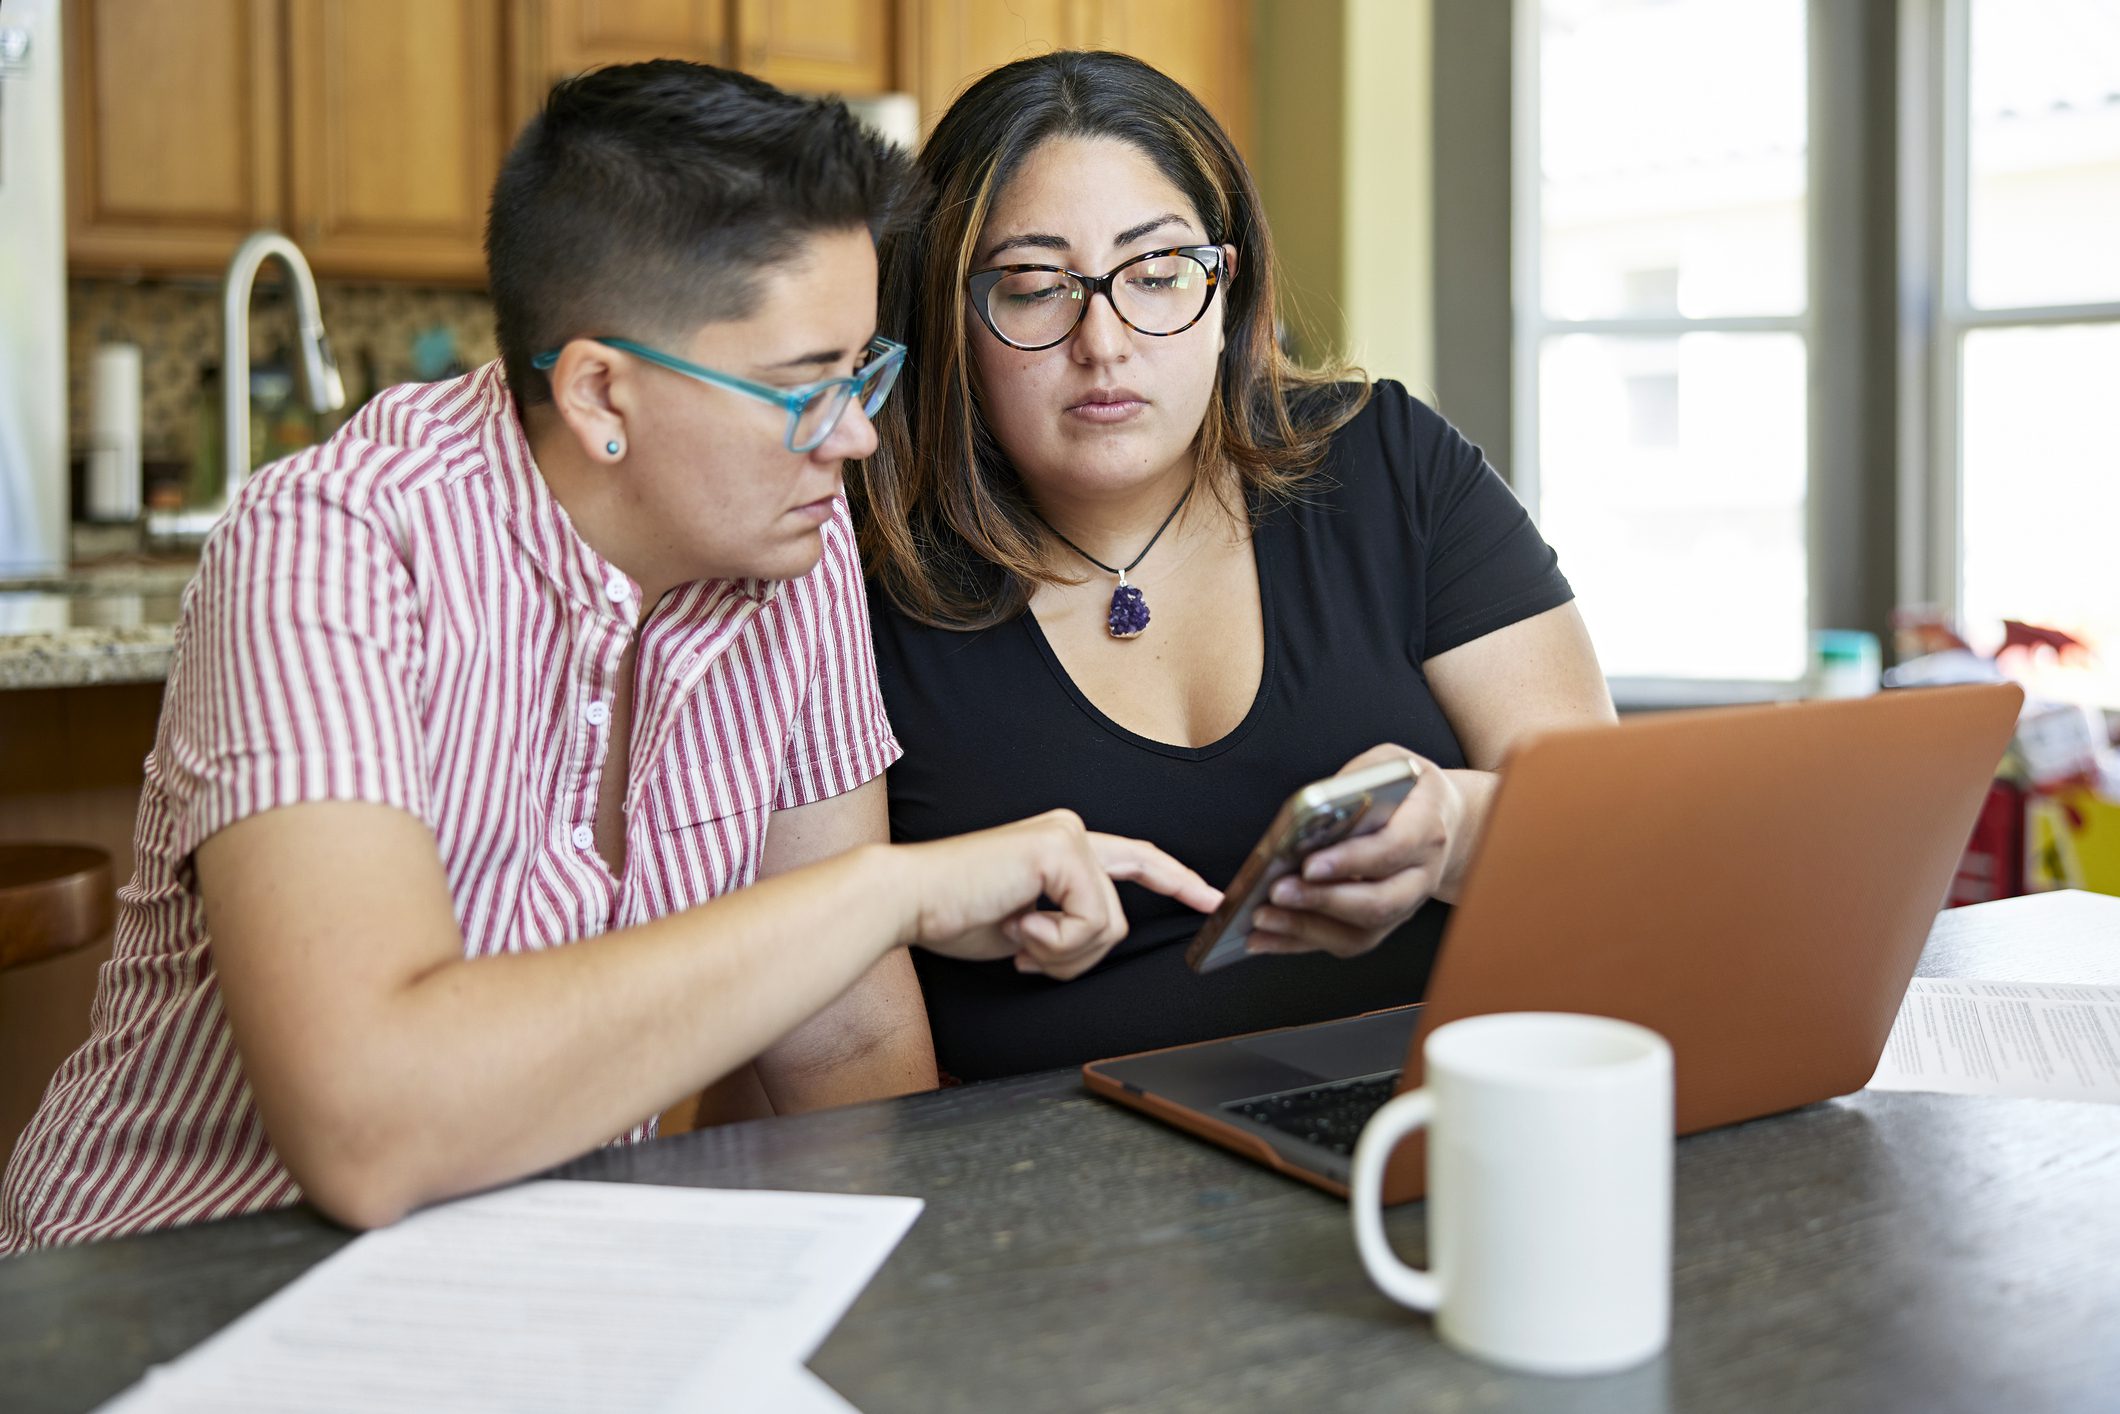 Two women wearing glasses look at a laptop and smartphone at their kitchen counter.